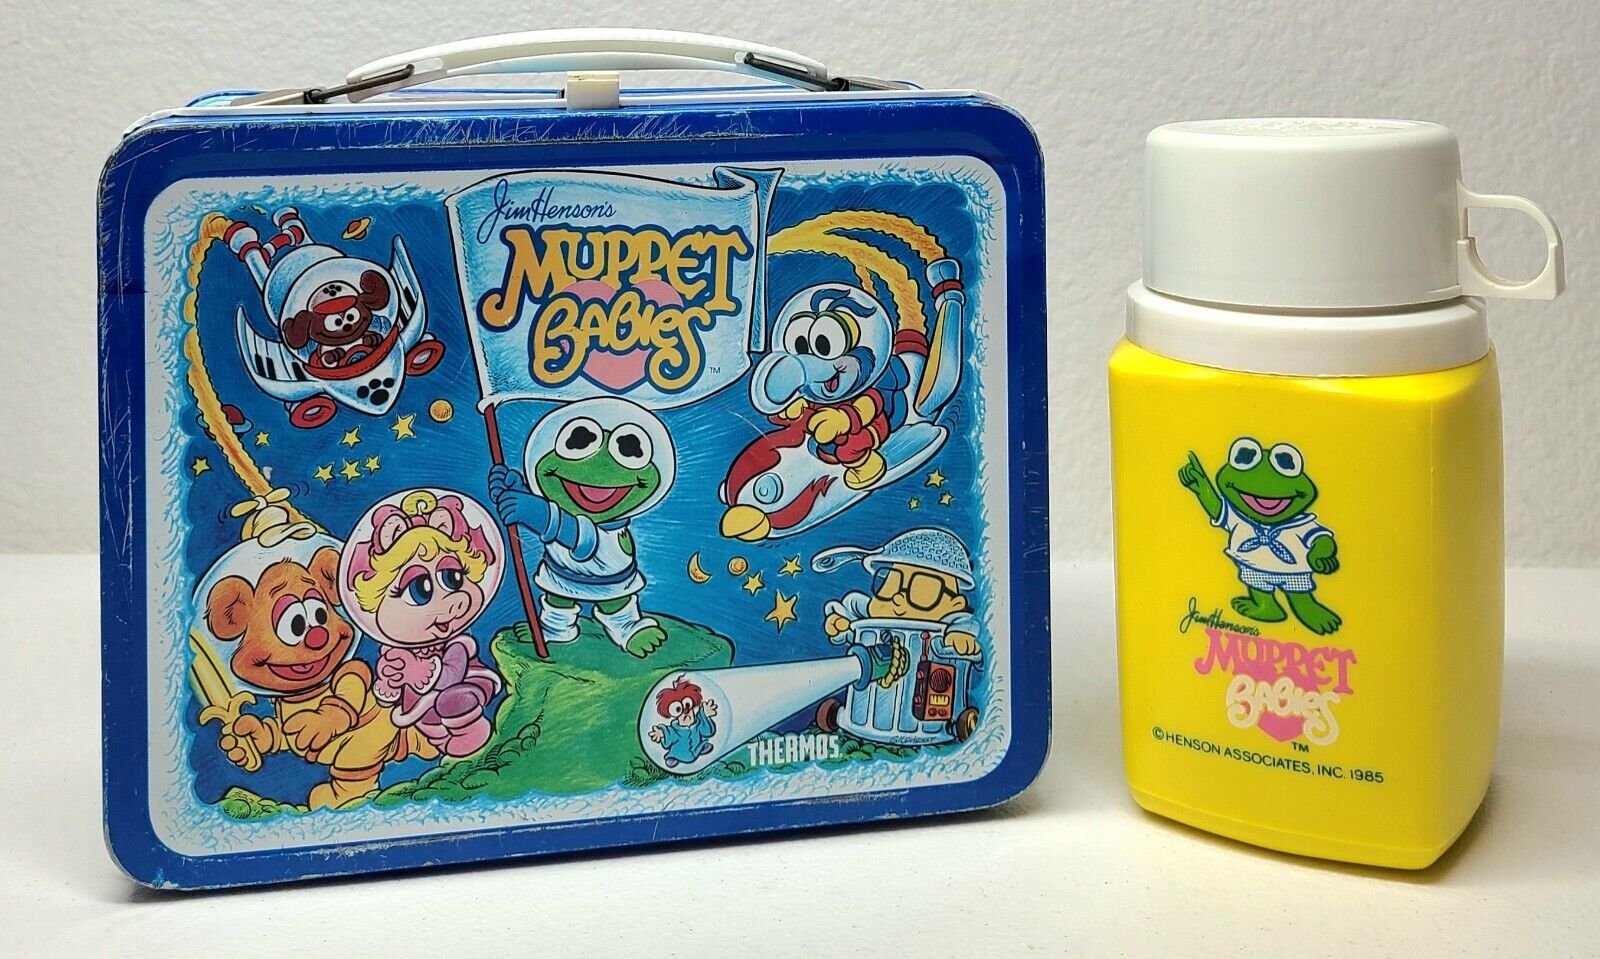 Vintage 1985 Jim Henson's Muppet Babies Metal Lunchbox & Thermos by Aladdin